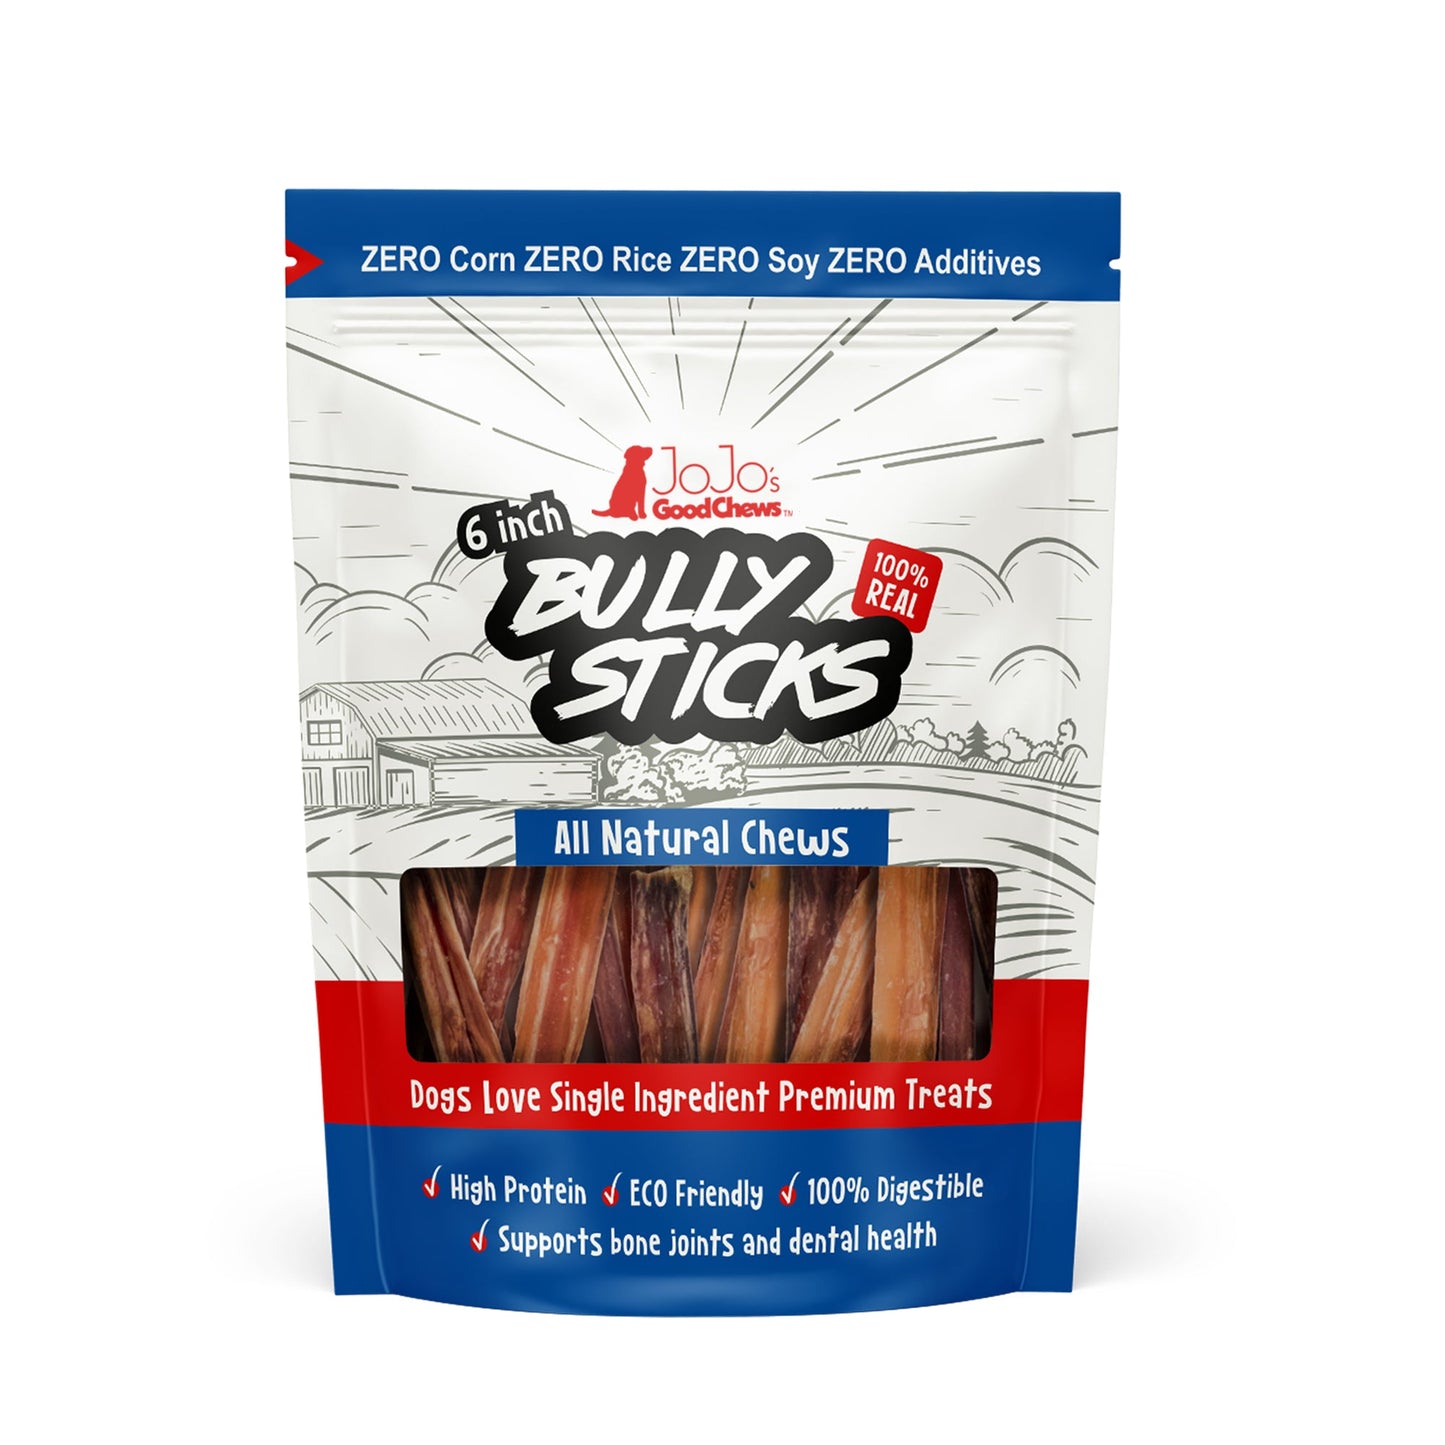 All-Natural Beef Bully Stick Dog Treats - 6" Standard (4-Pack)